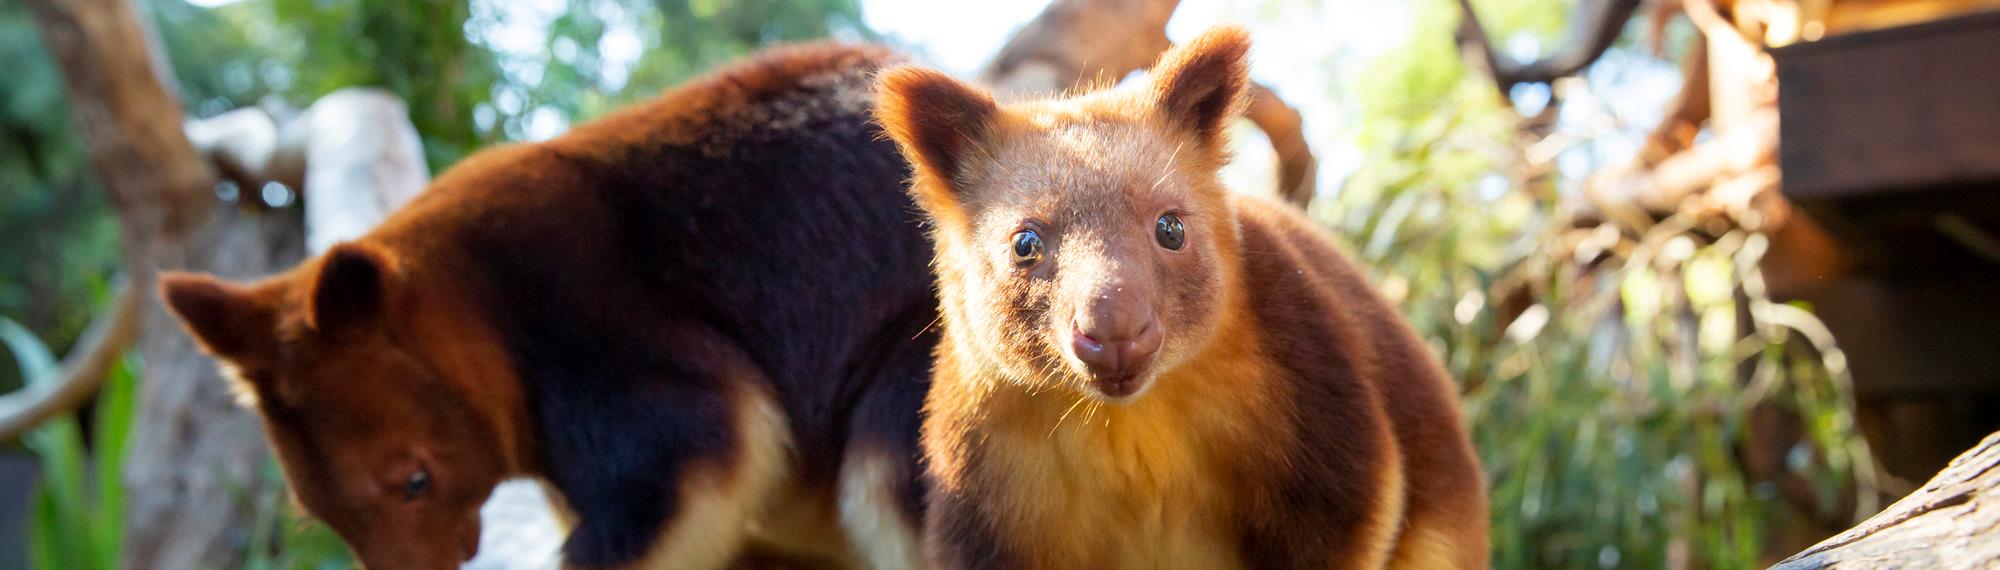 Tree kangaroo staring directly into camera with another tree kangaroo in the background perching on a branch